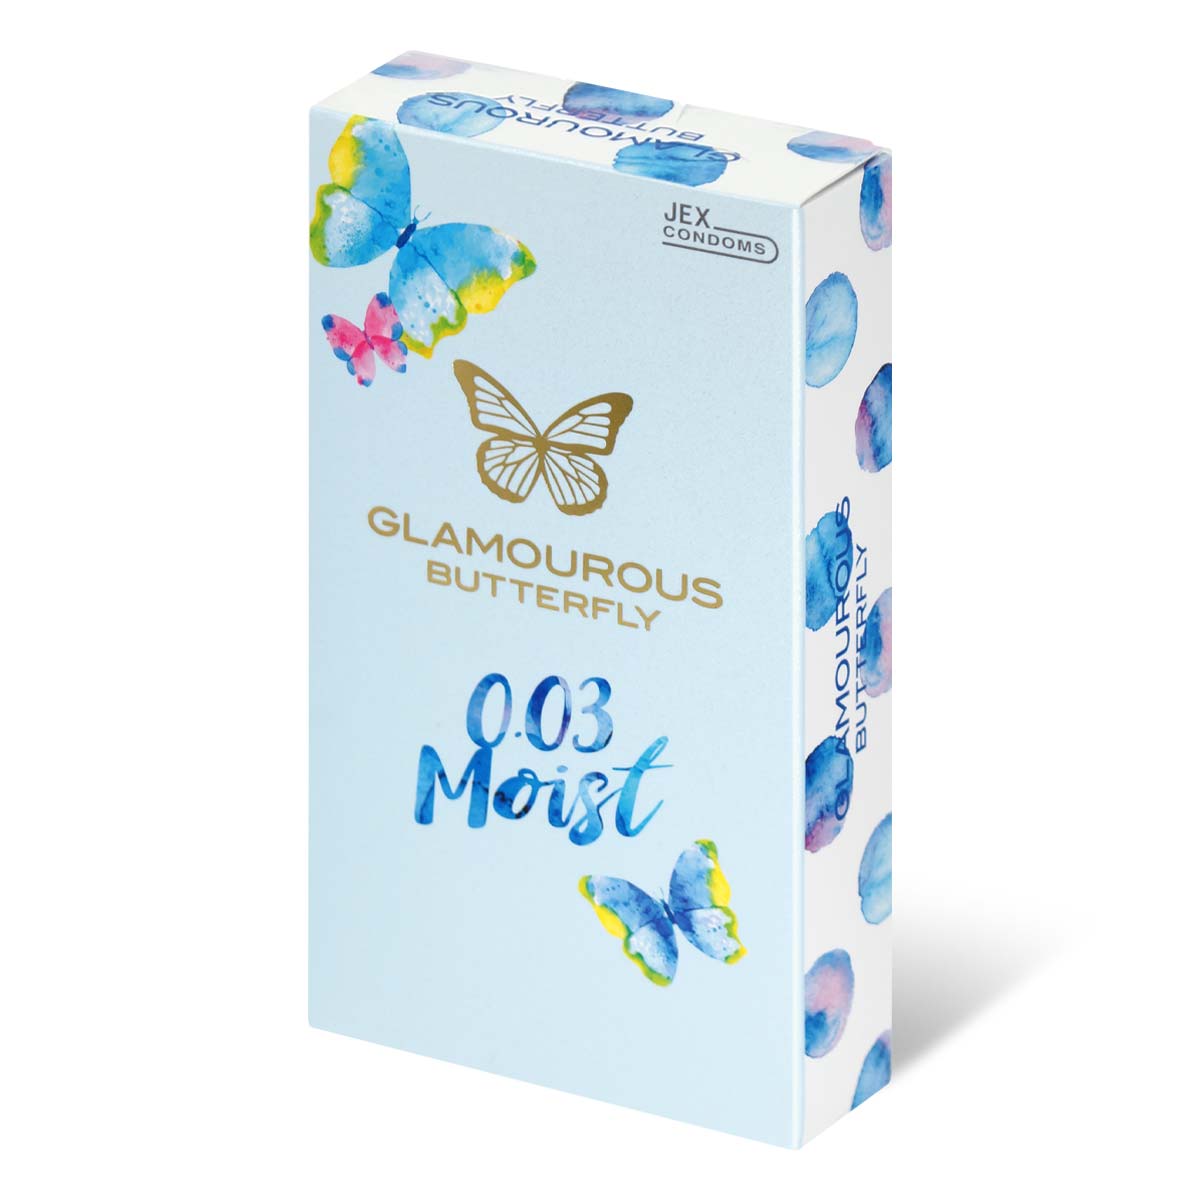 Glamourous Butterfly 0.03 Moist Type 10's Pack Latex Condom-p_1